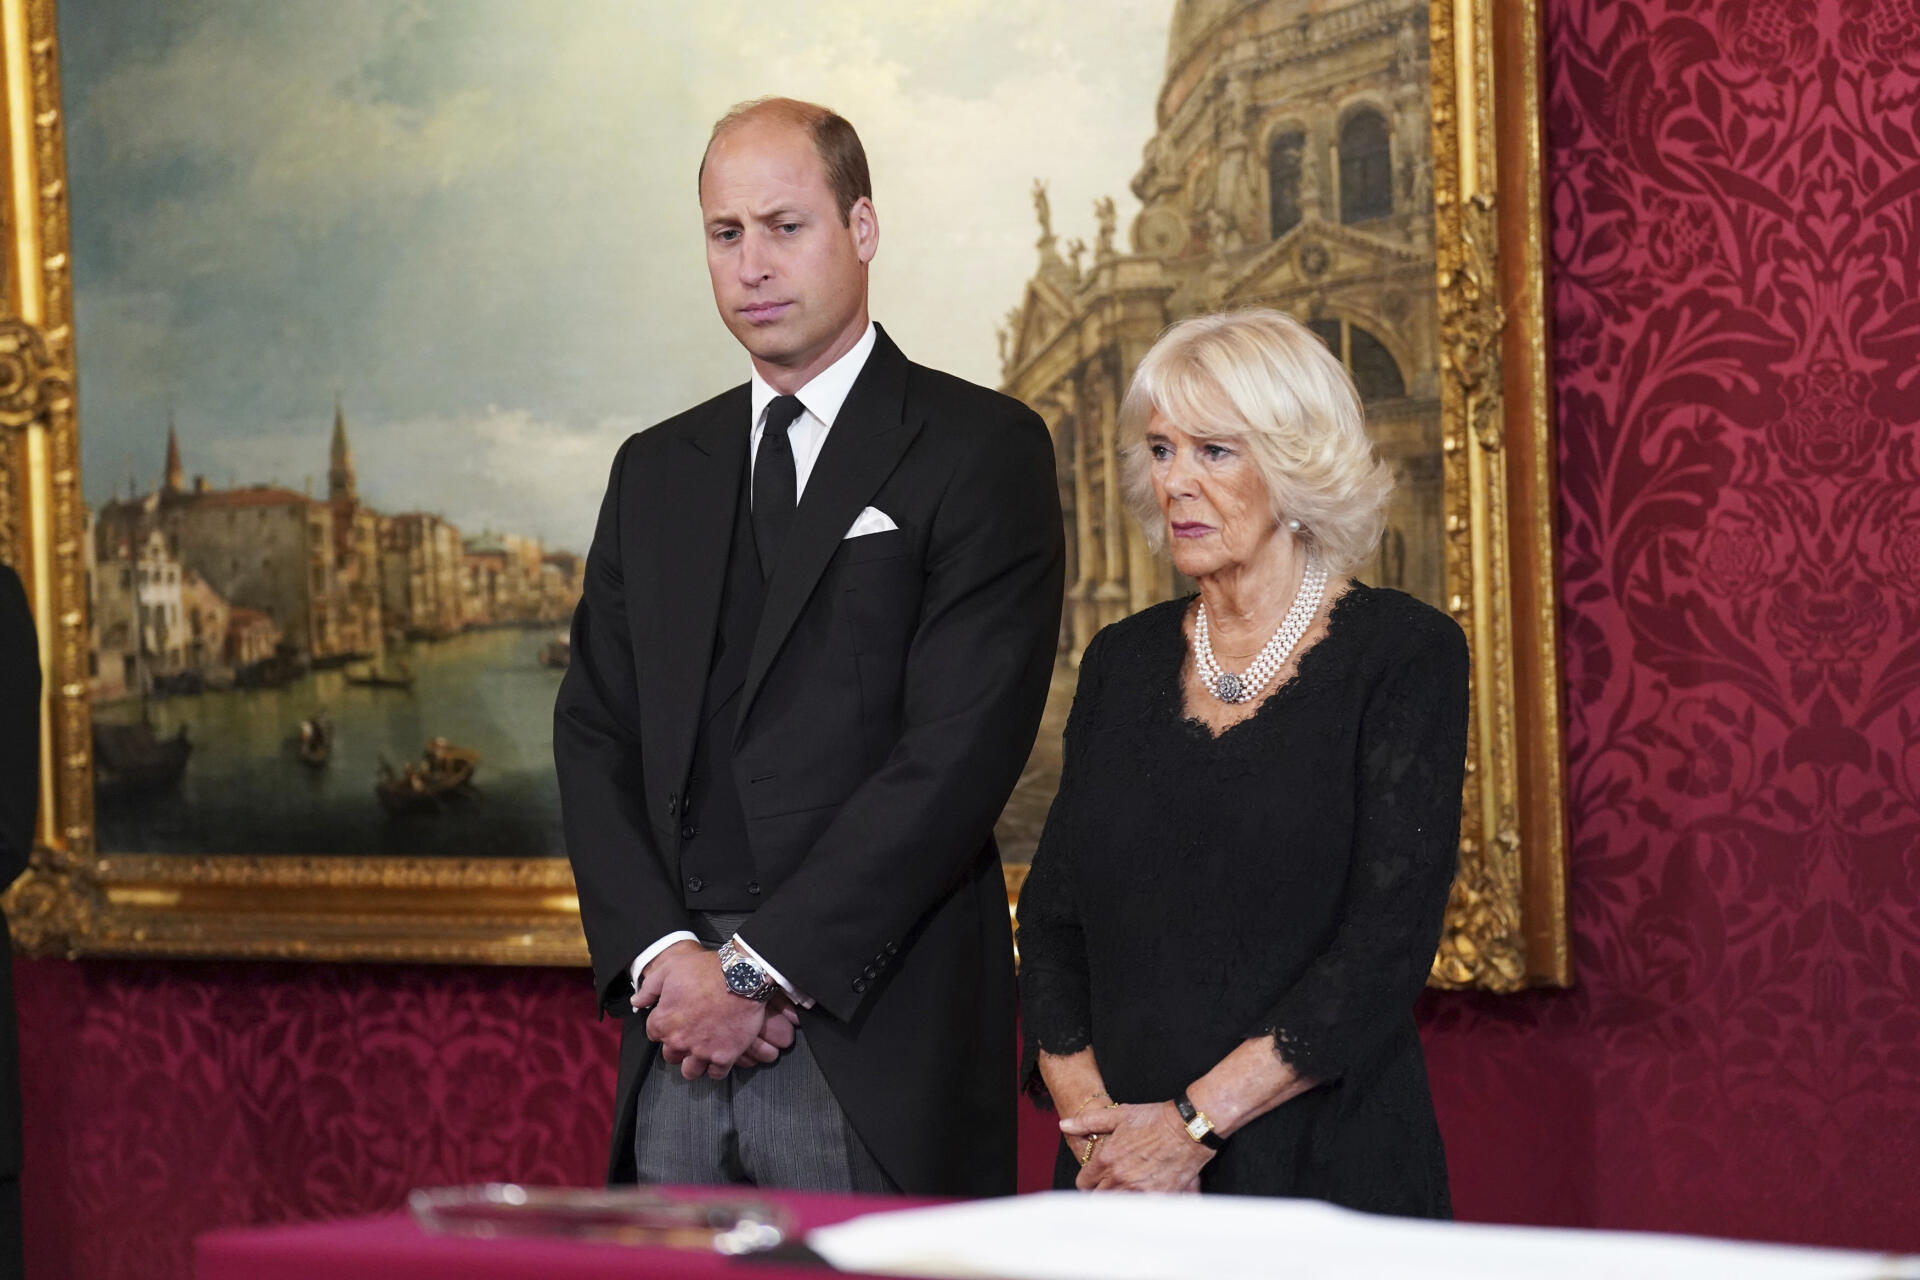 Prince William and Queen Consort Camilla at the Council of Accession ceremony at St James's Palace, London. September 10, 2022.